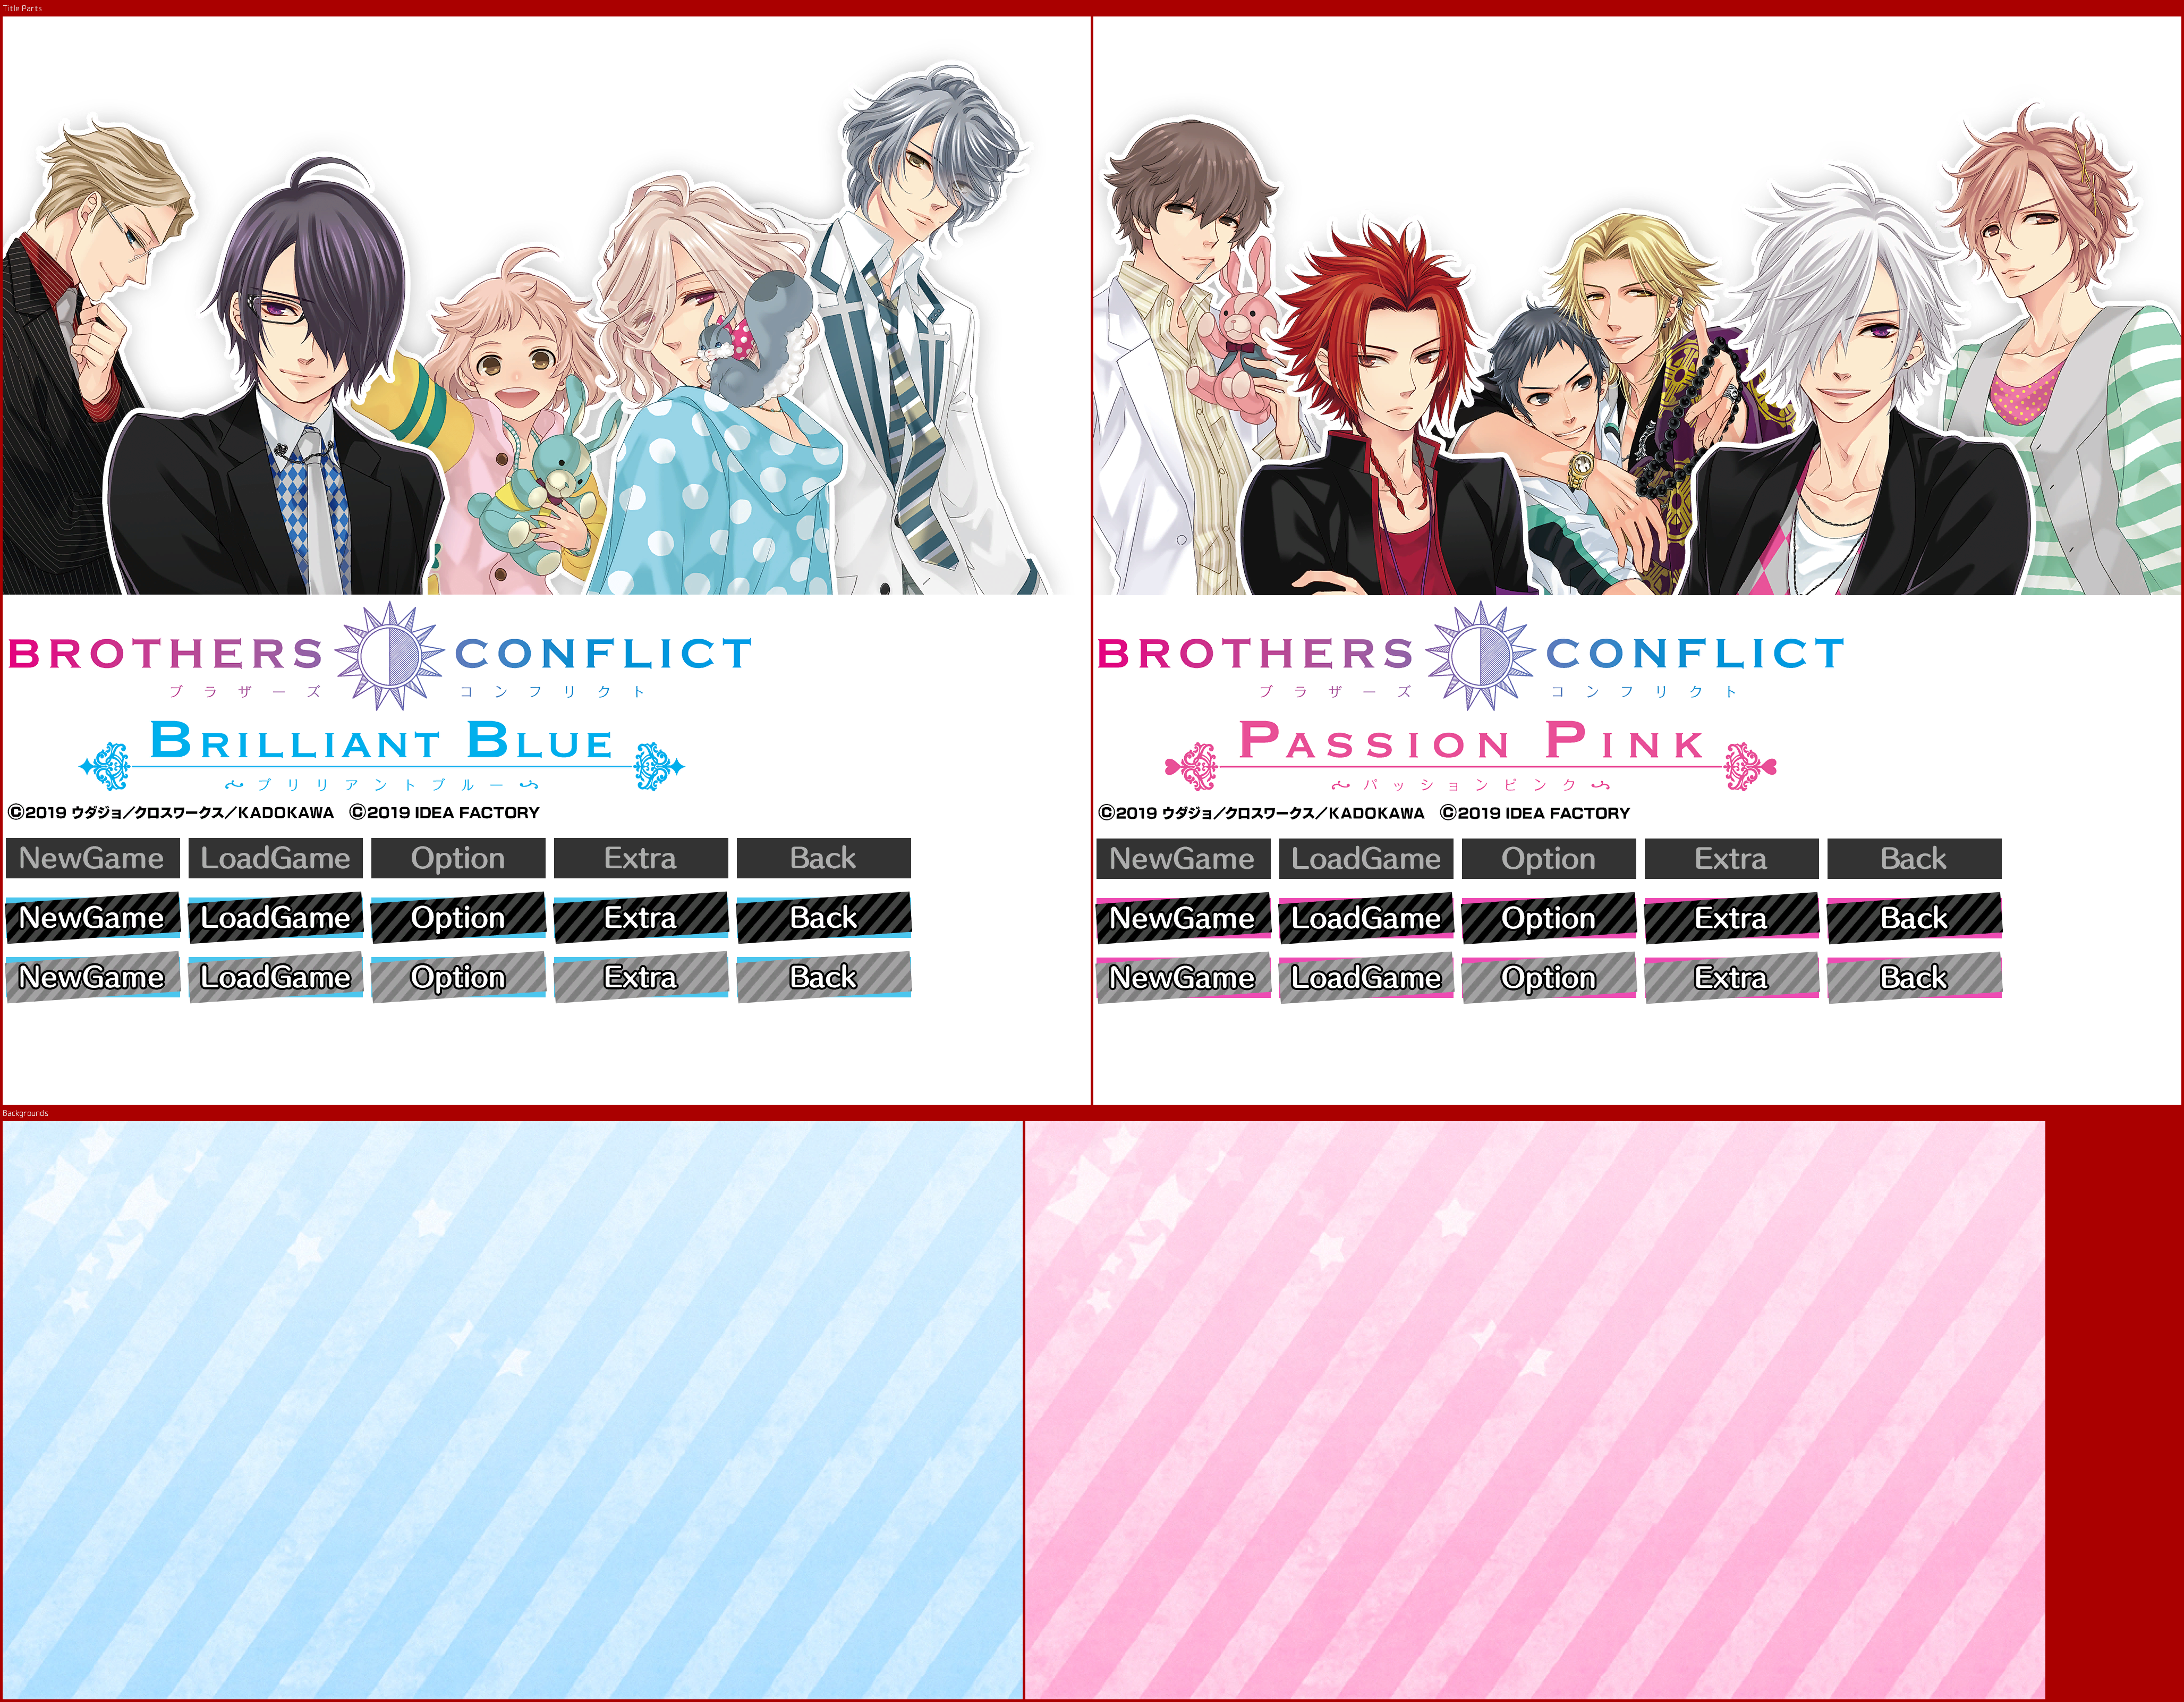 BROTHERS CONFLICT: Precious Baby for Nintendo Switch (Japan) - Game Title Screens